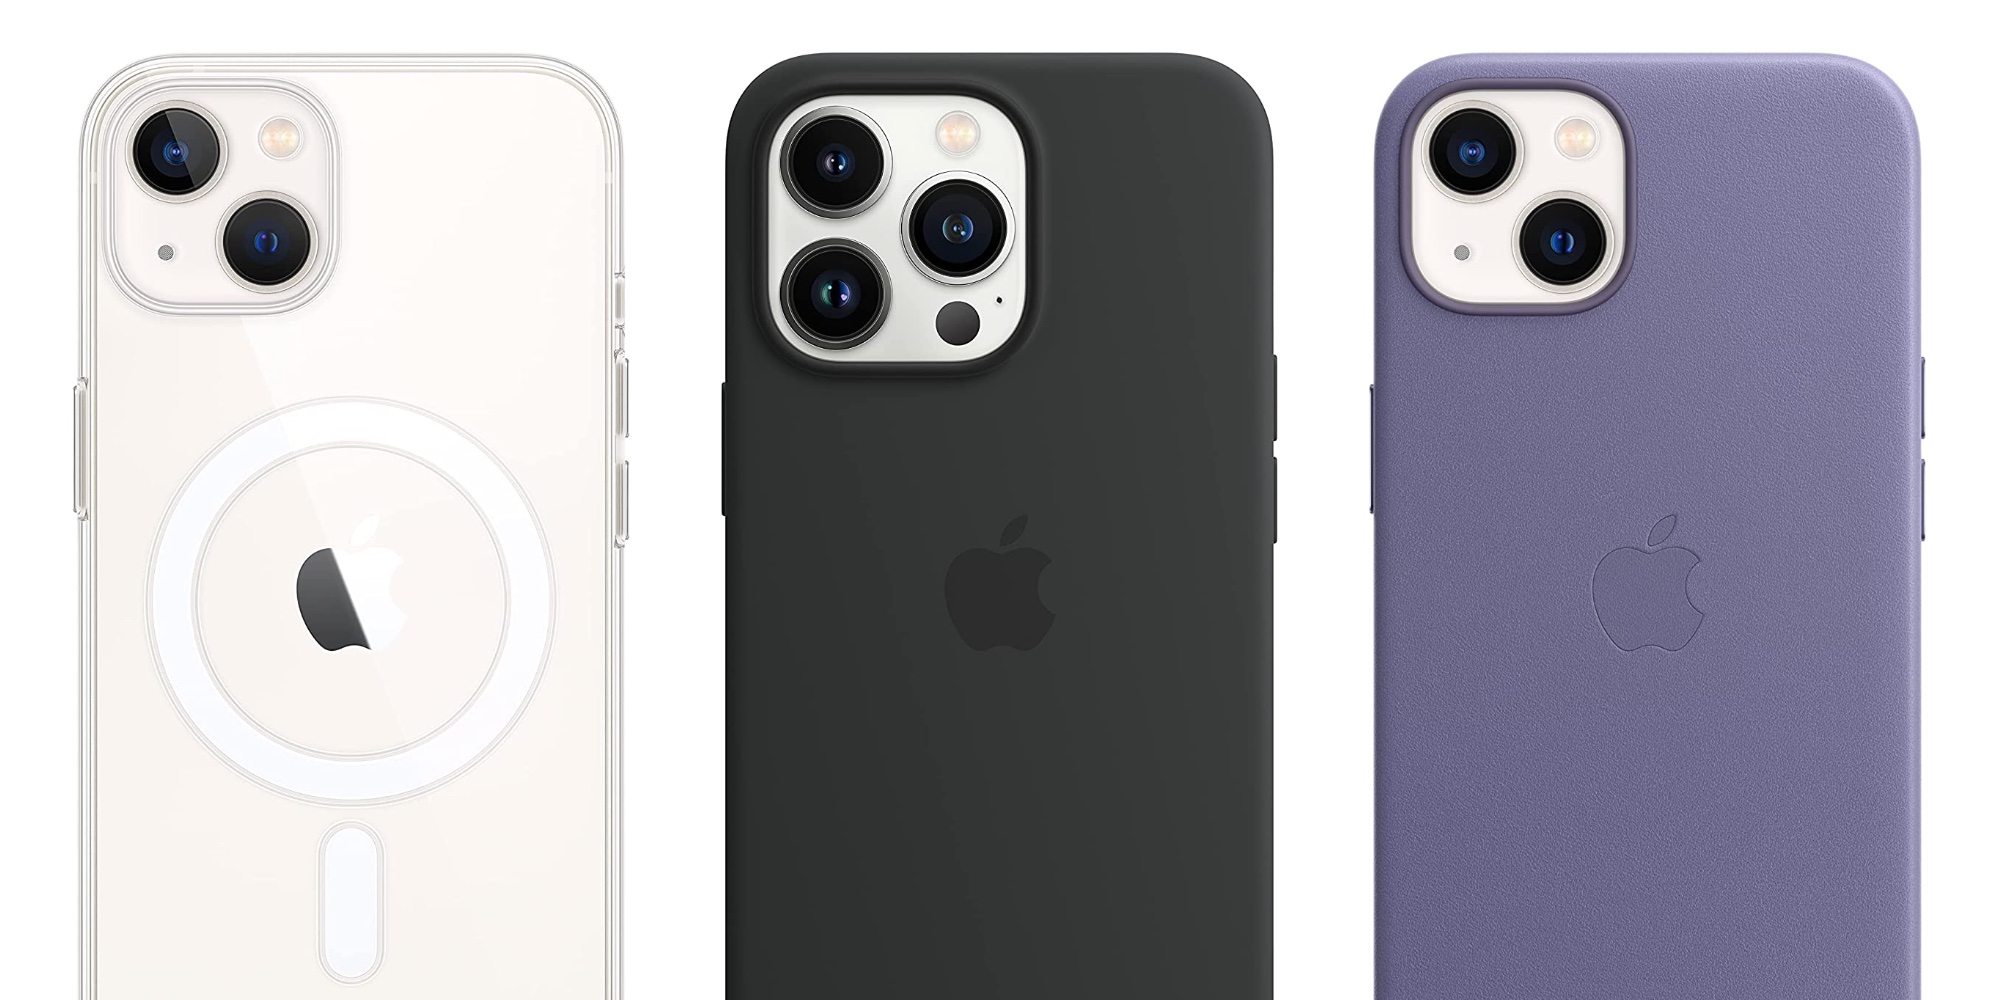 Save on nearly all of Apple's official iPhone 13 series cases from $30 at   (Reg. $49+)